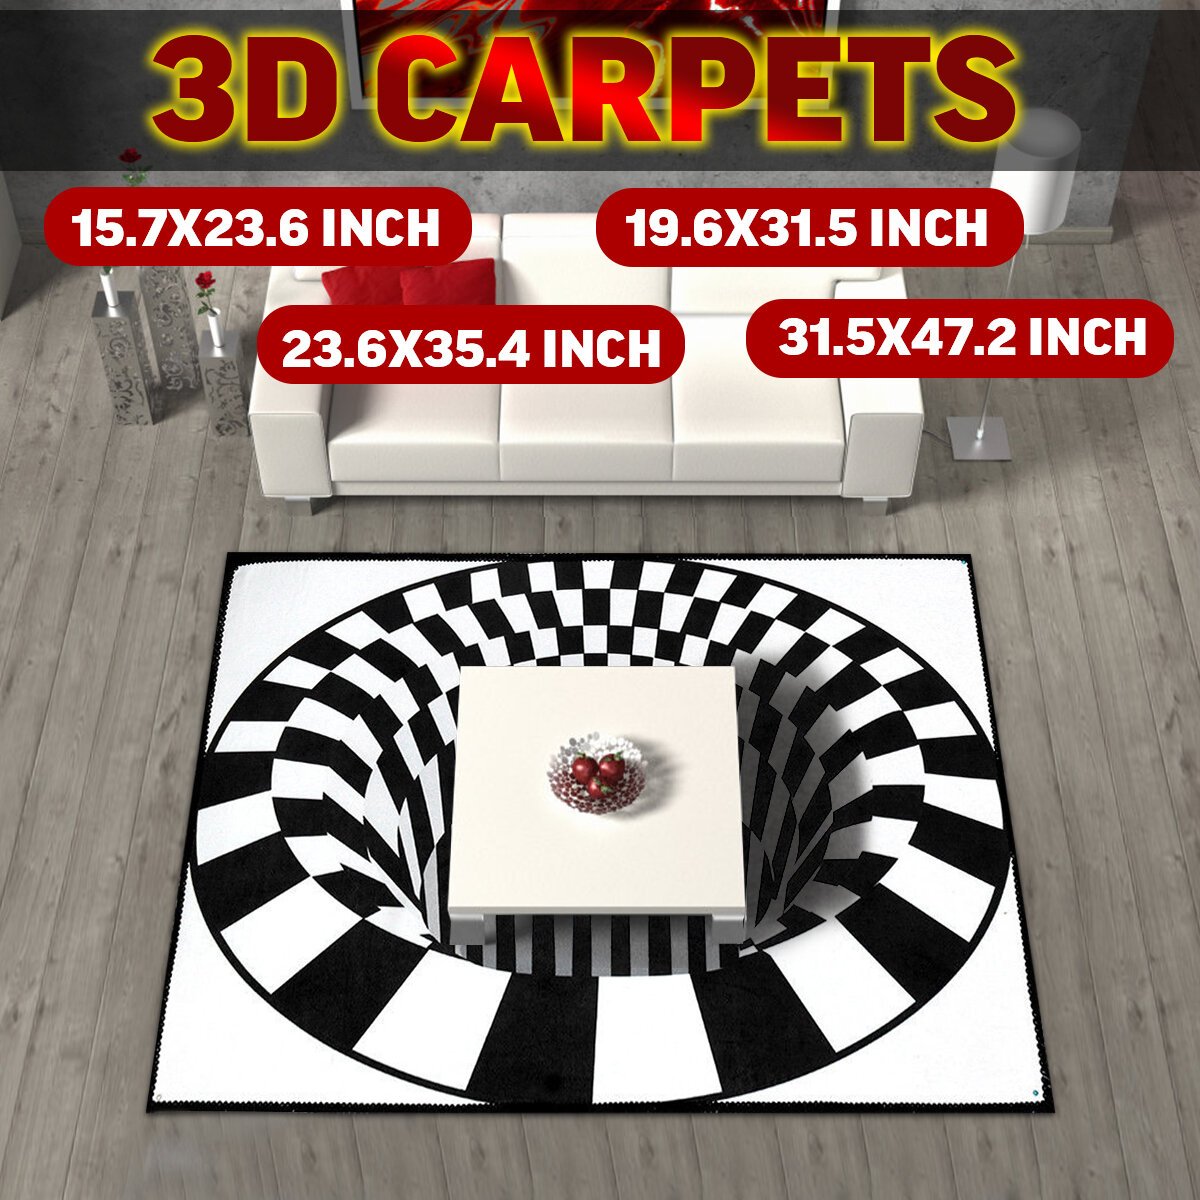 Ouniman Shaggy Rectangle Area Rug Creative 3D Modern Accent Rugs Anti-Skid Black White Plaid Check Contemporary Carpet Luxury Washable Living Dining Room Sofa Home Bedroom Floor Mat